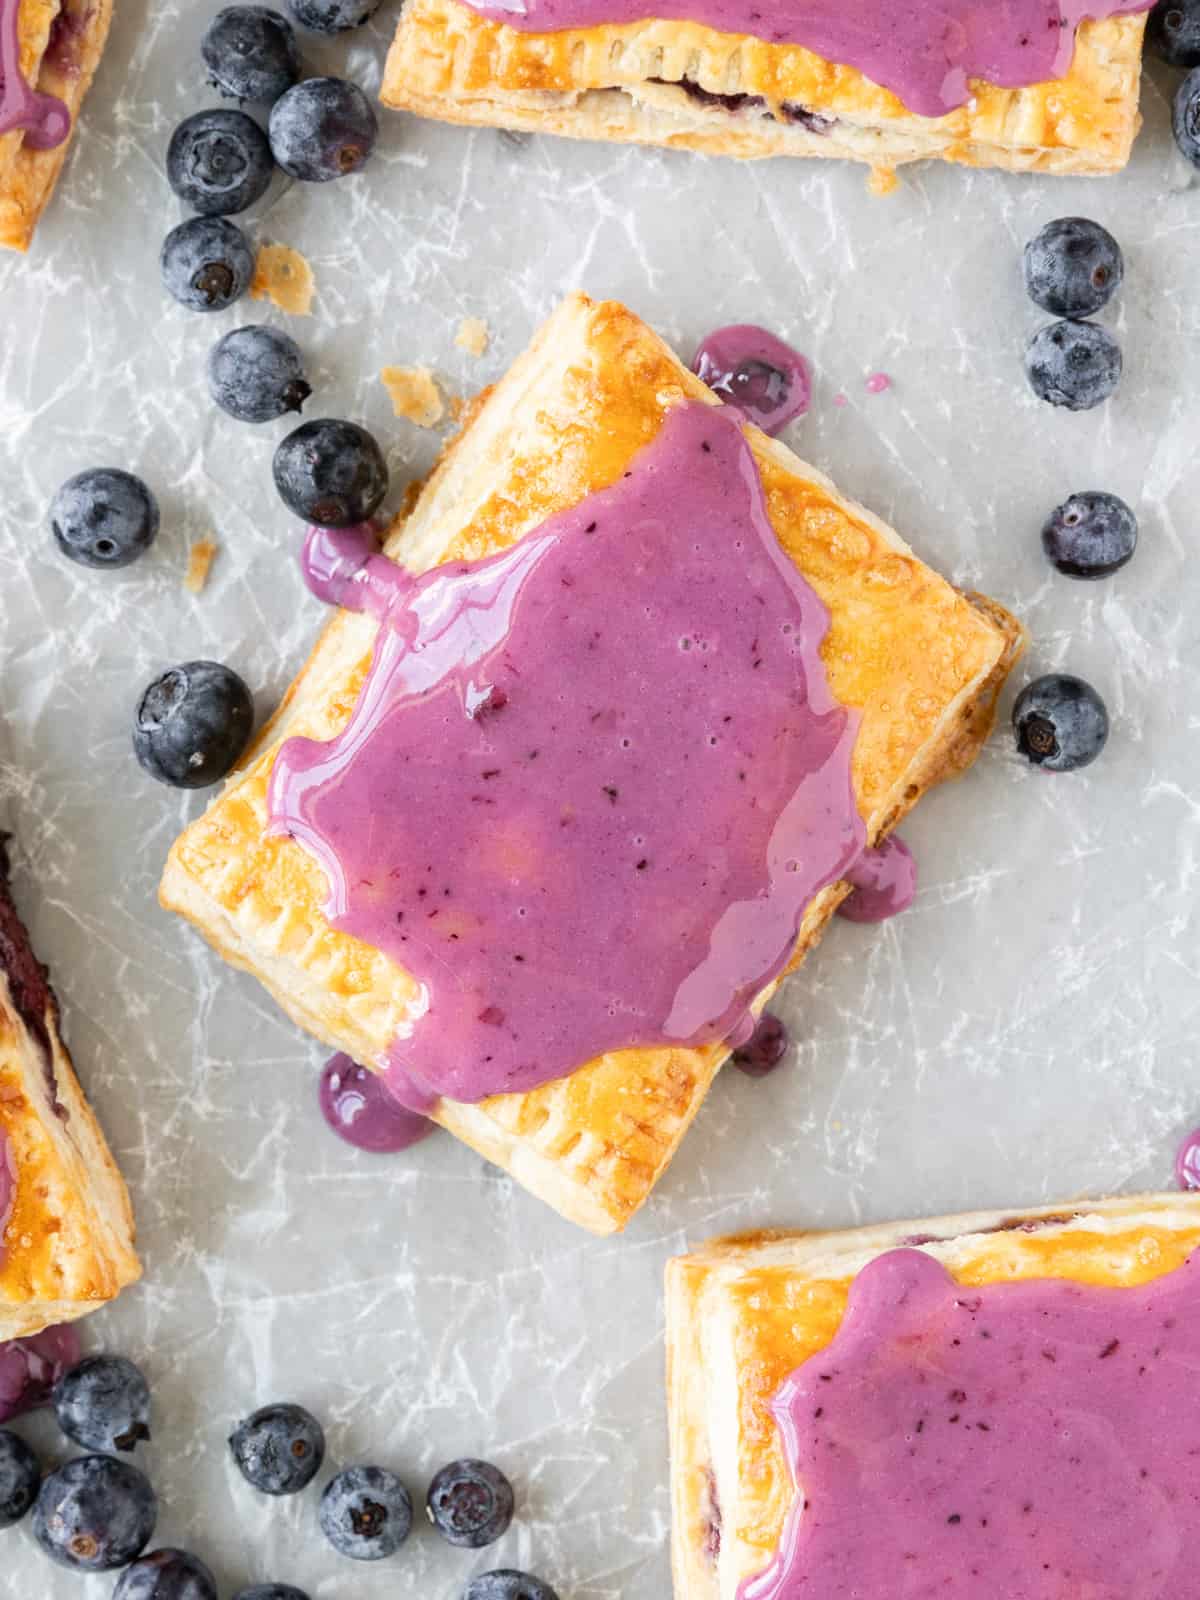 a blueberry pop tart on parchment paper surrounded by other pop tarts and fresh blueberries